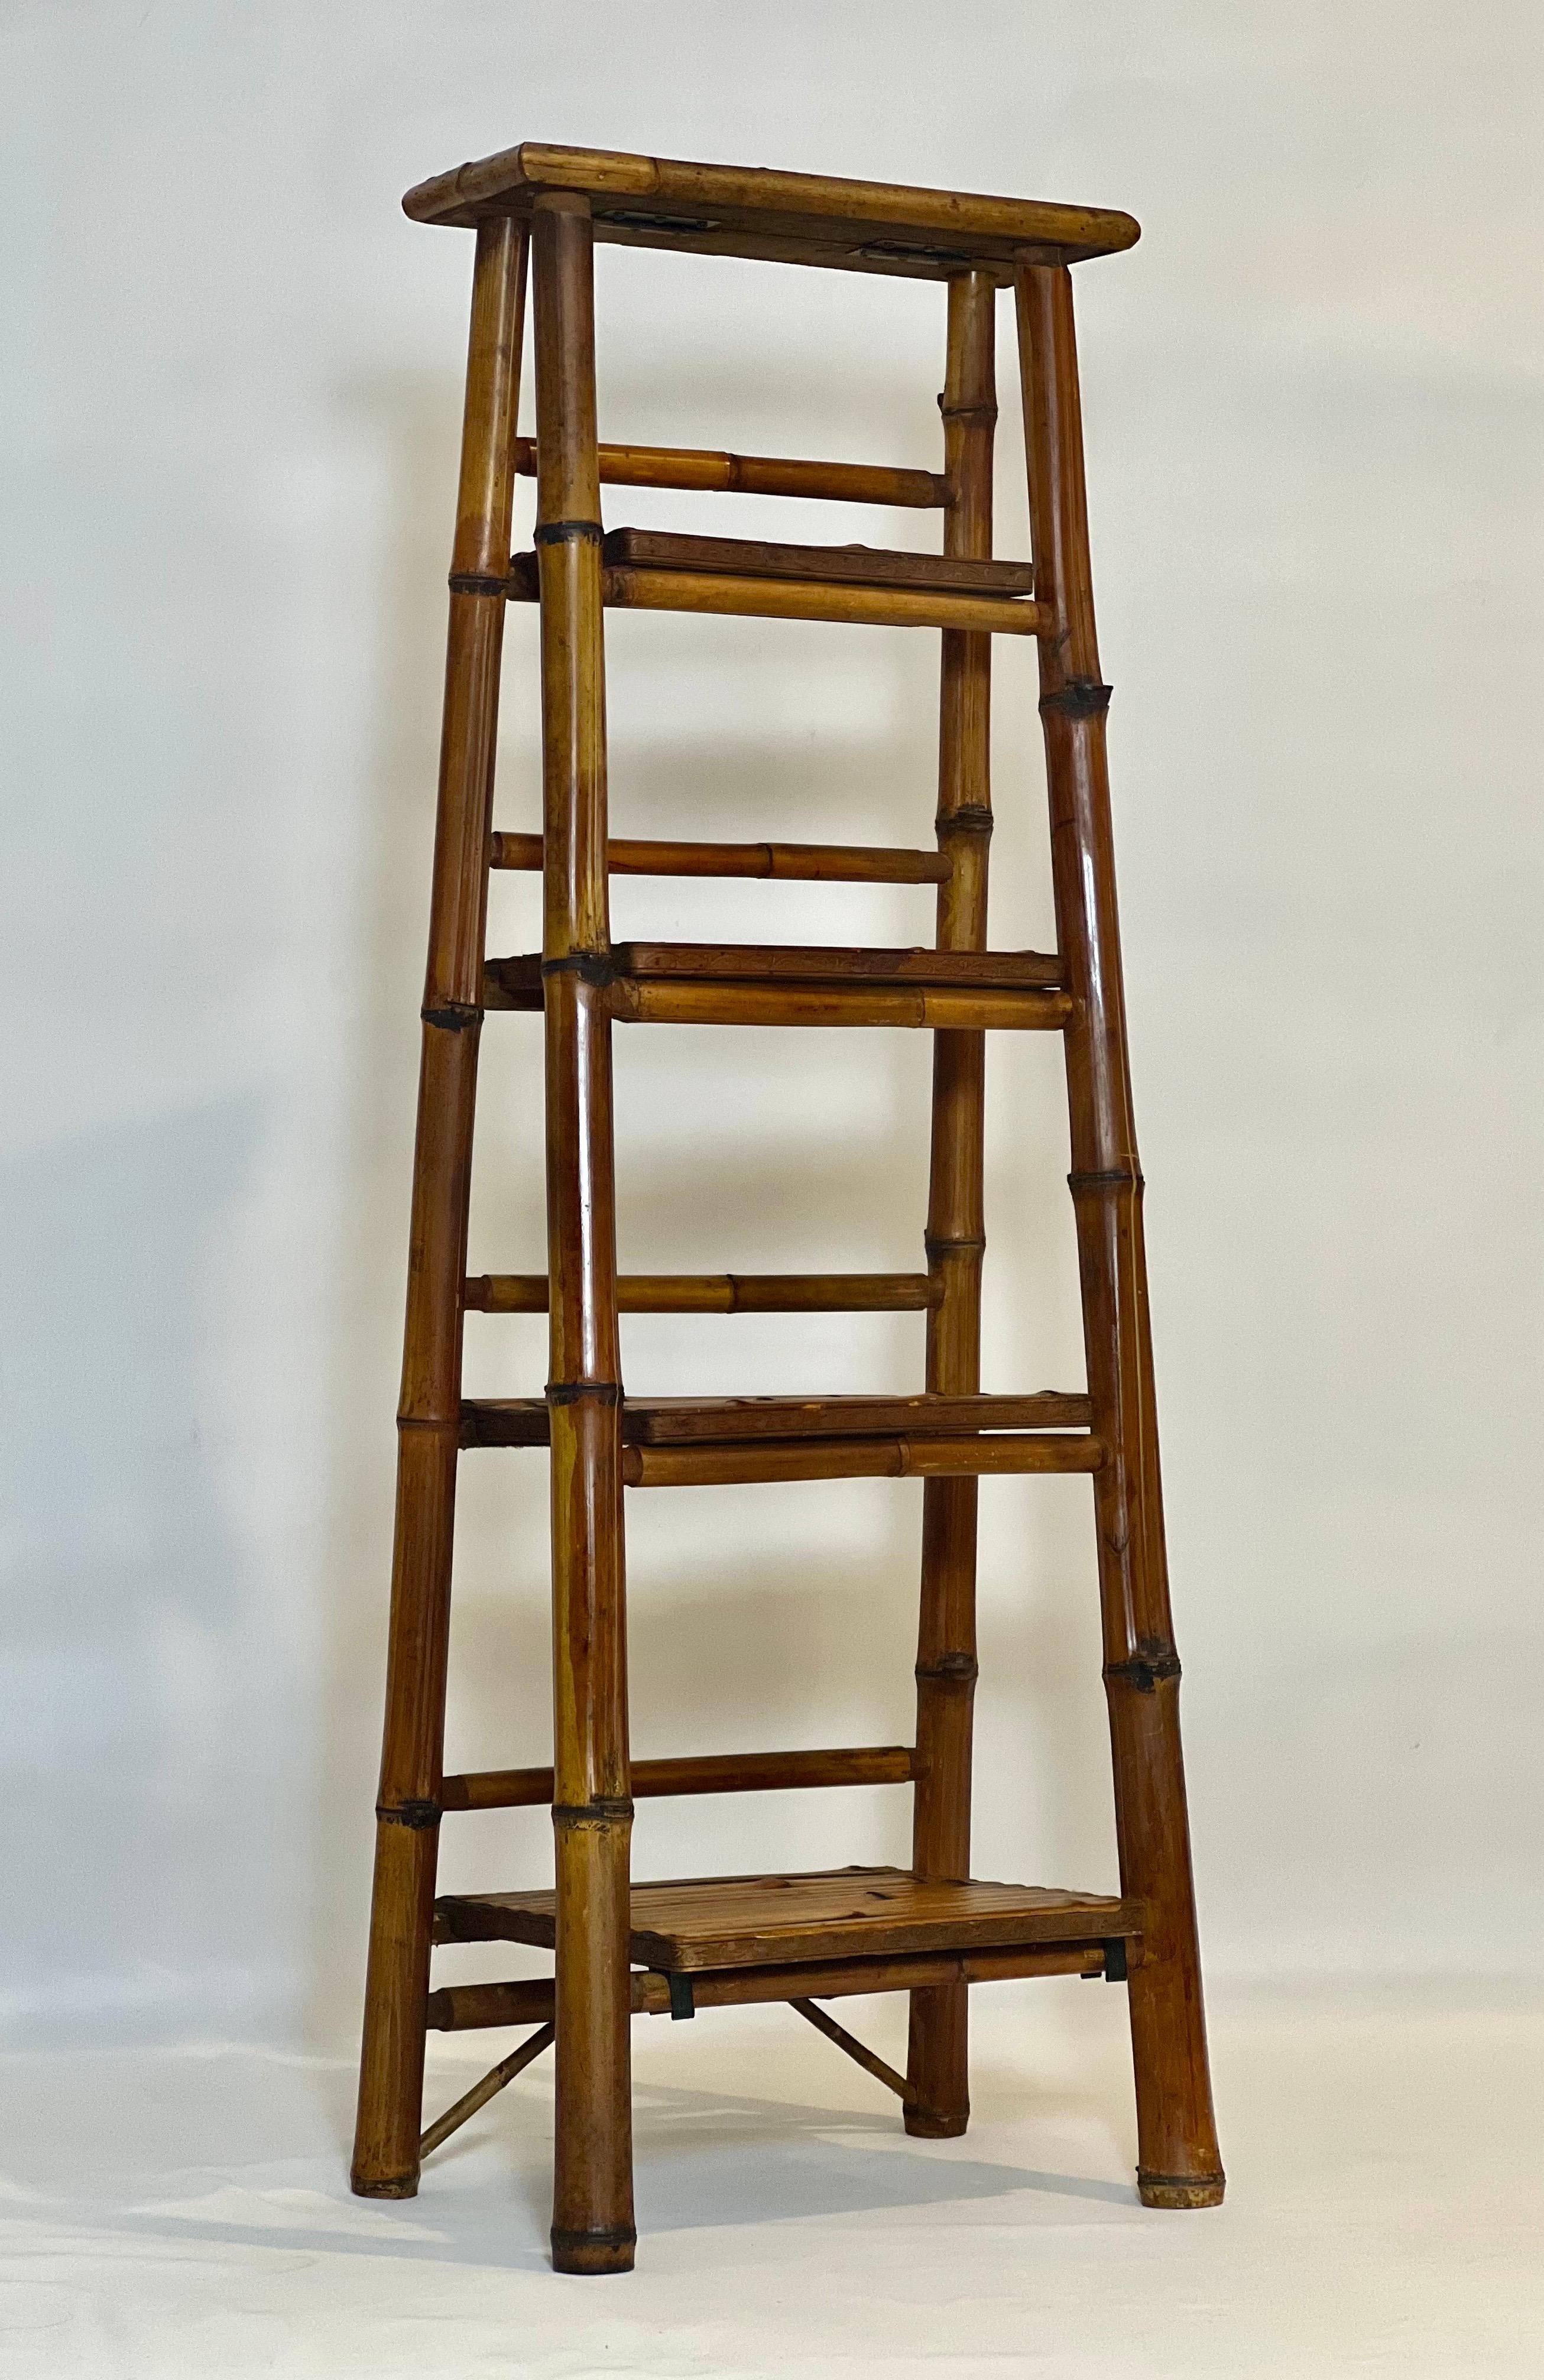 Vintage Bamboo A-Frame Etagere or Book Stand 1